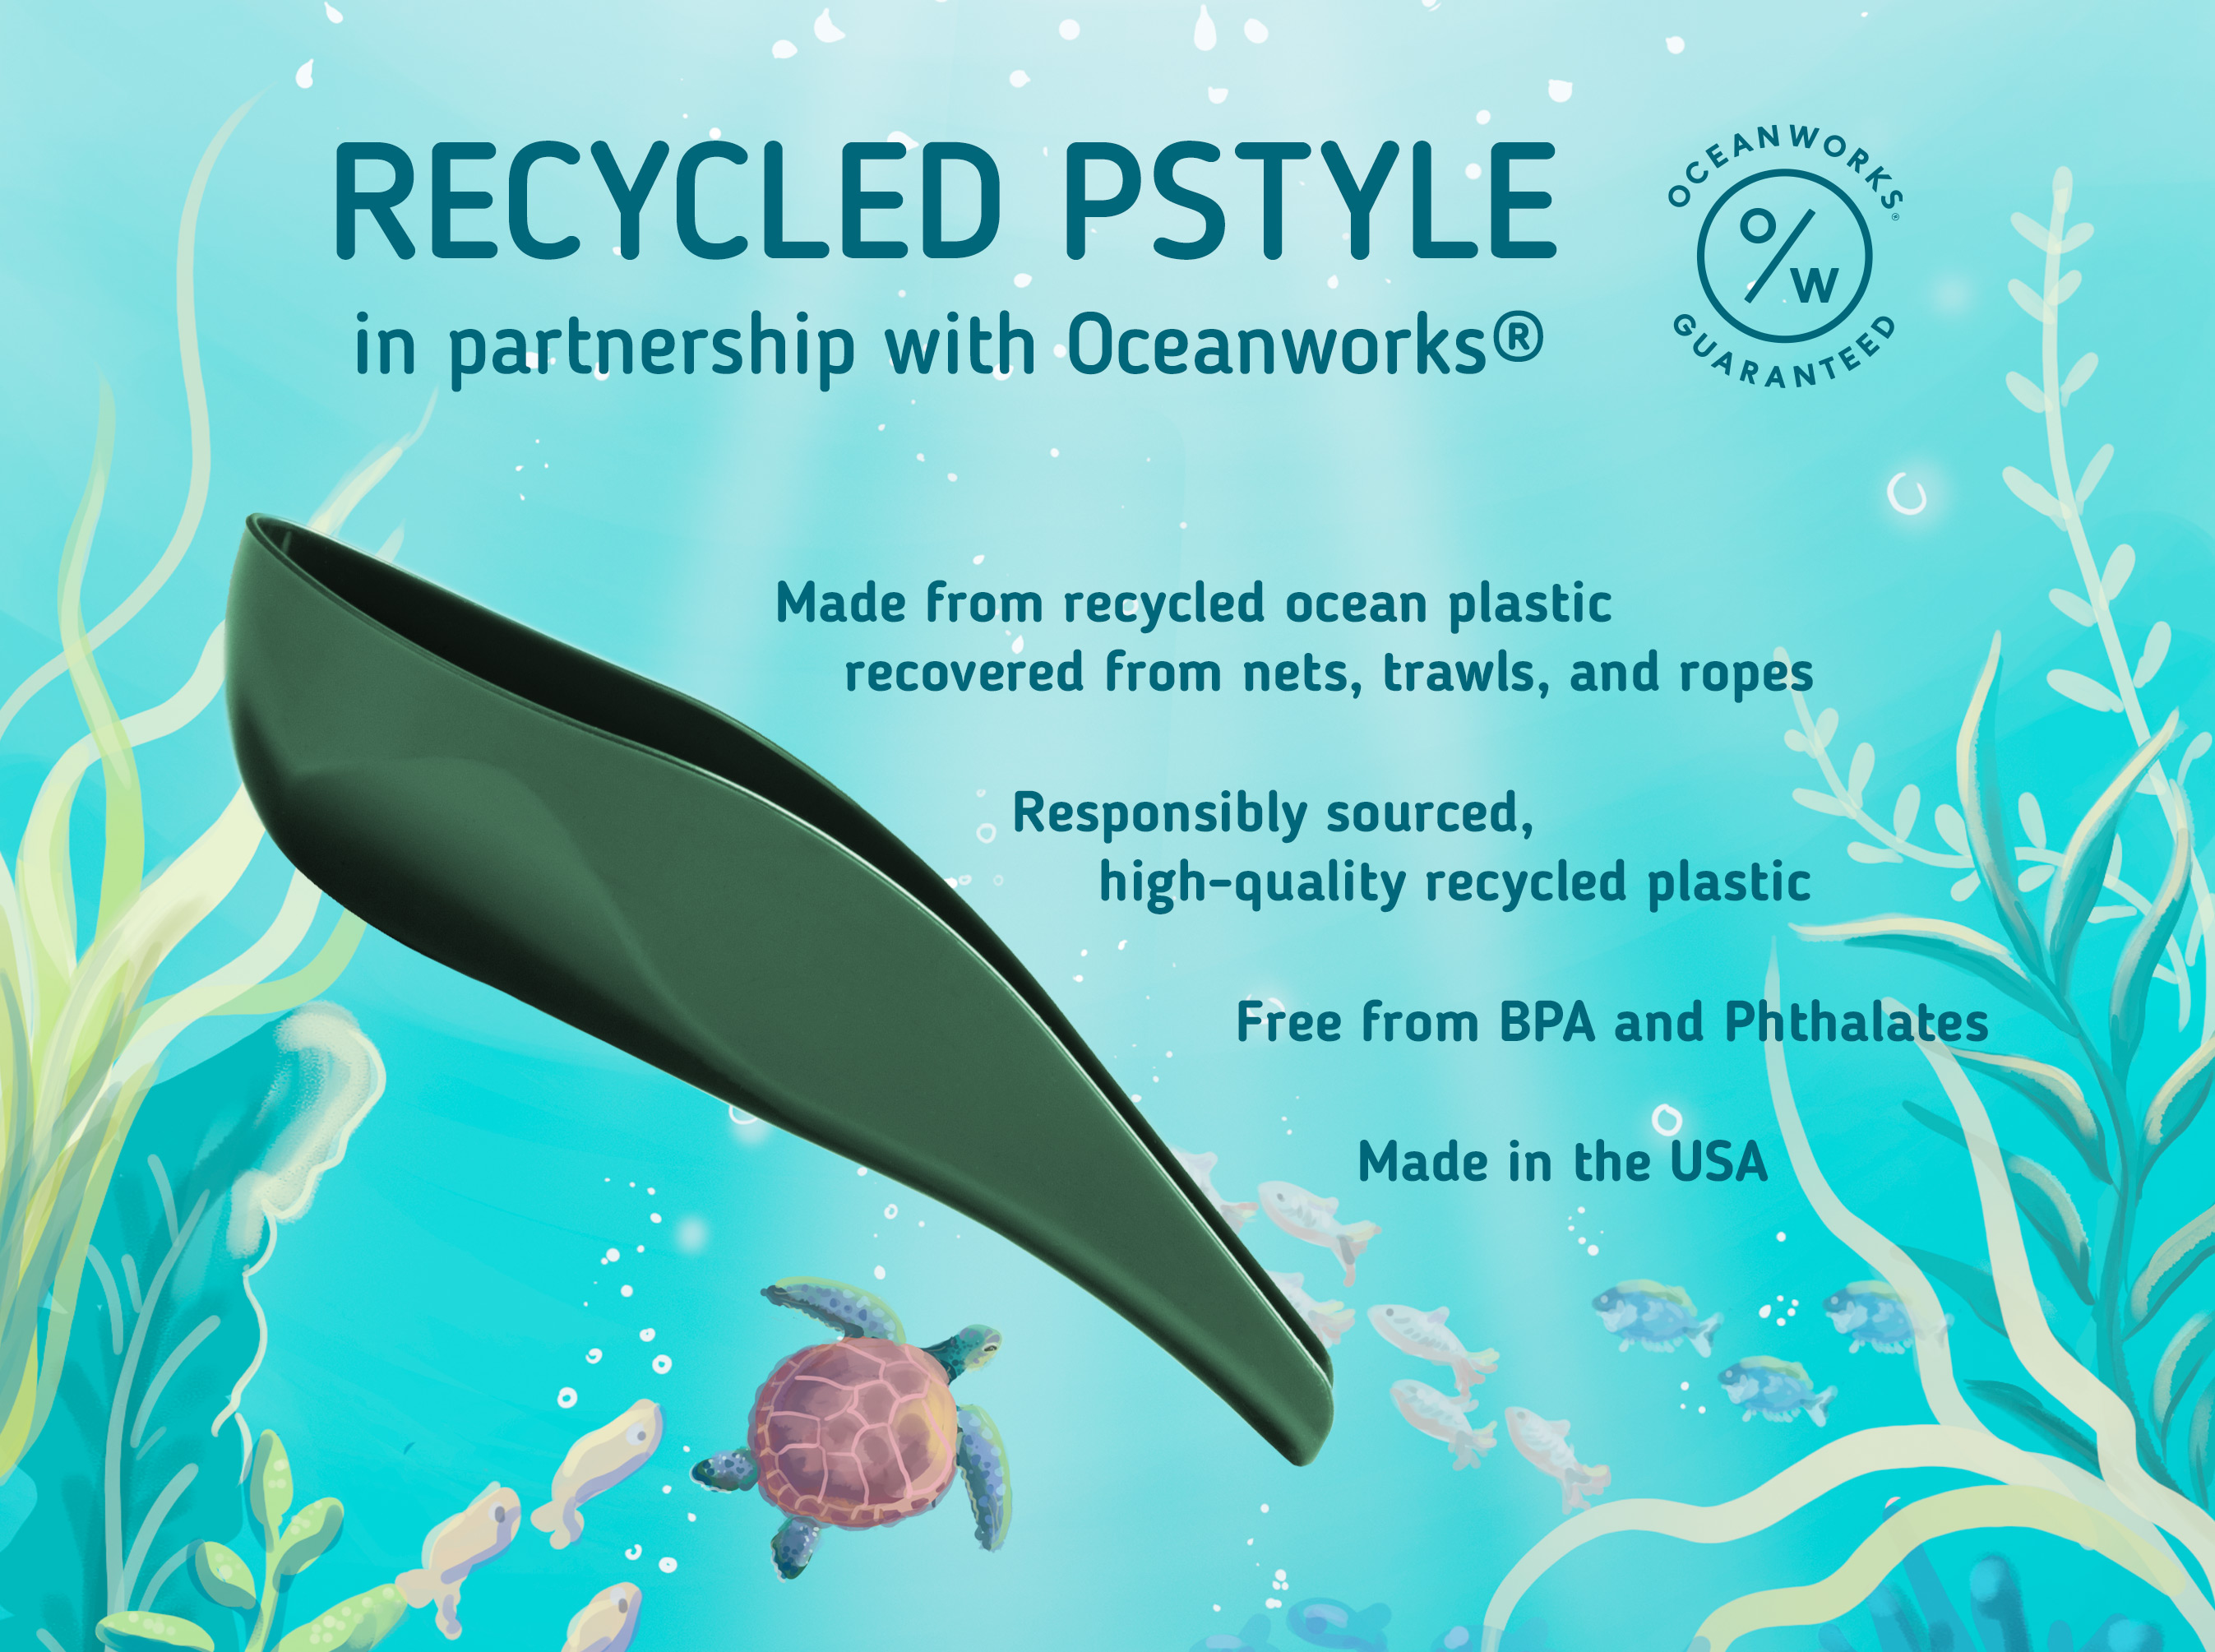 Recycled pStyle in partnership with Oceanworks